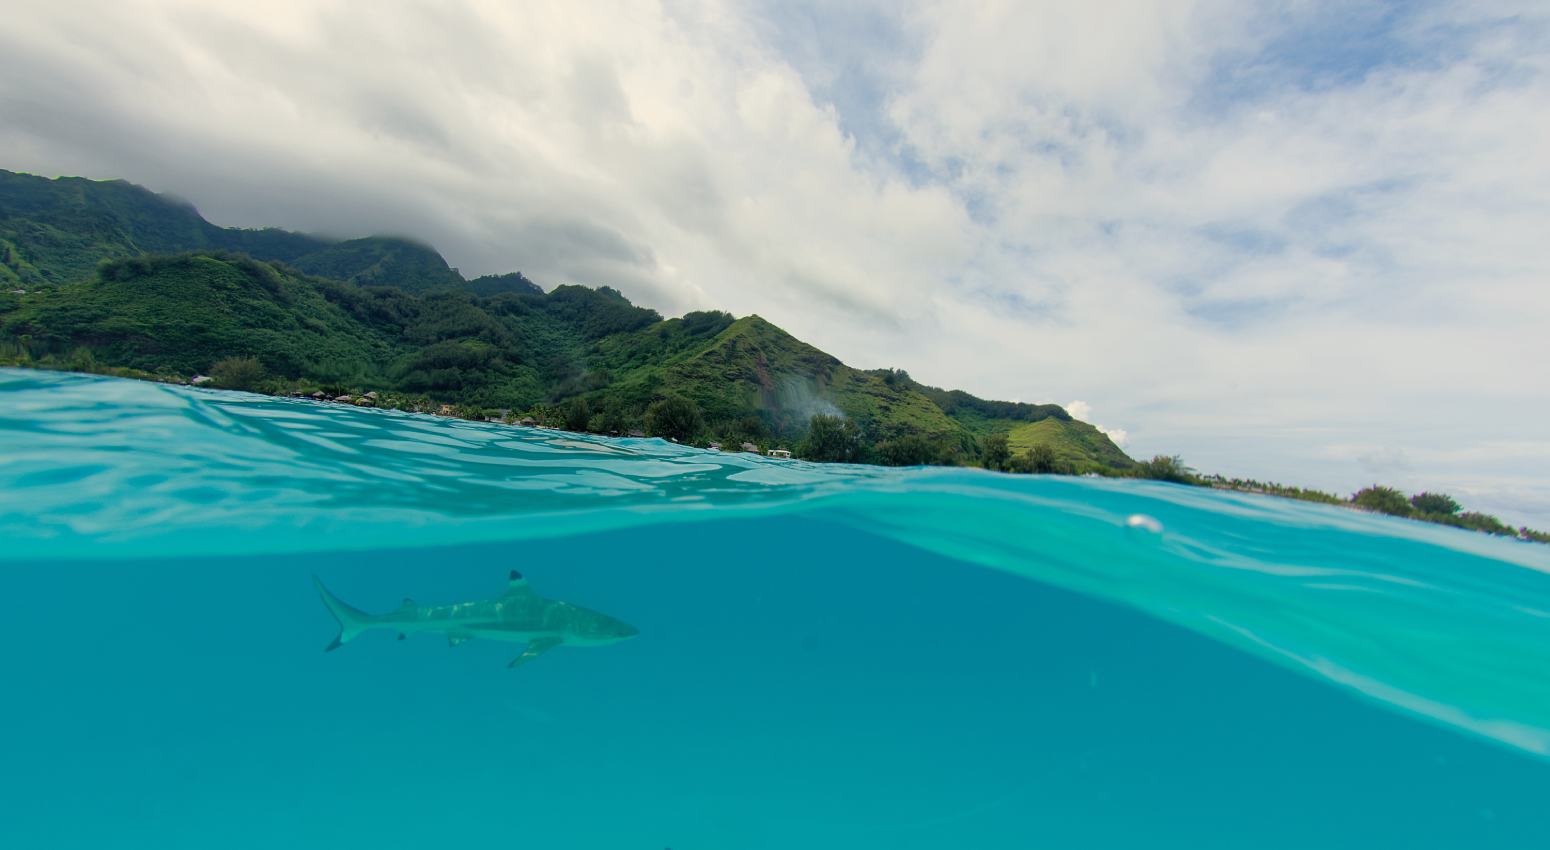 undewater view of a shark with a tropical island in the background